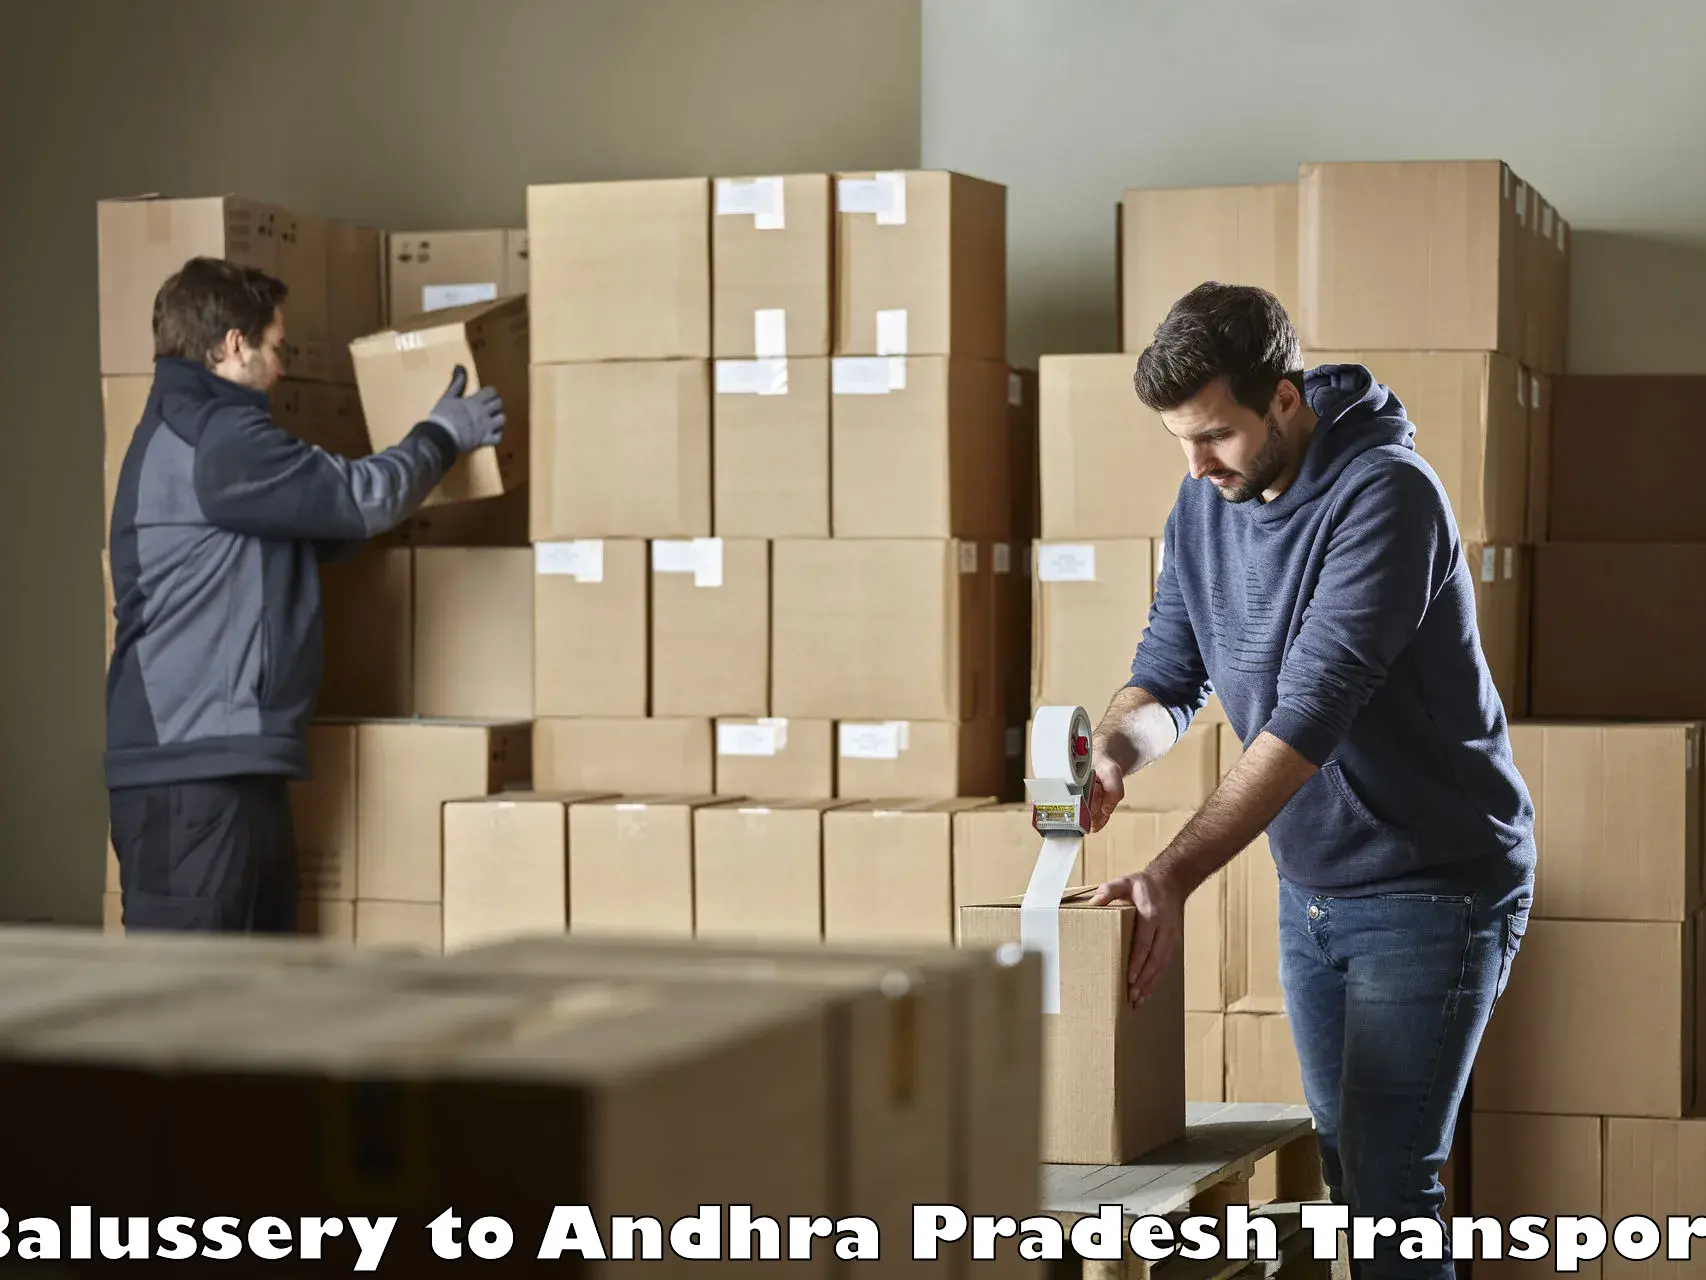 Daily parcel service transport Balussery to Podalakur